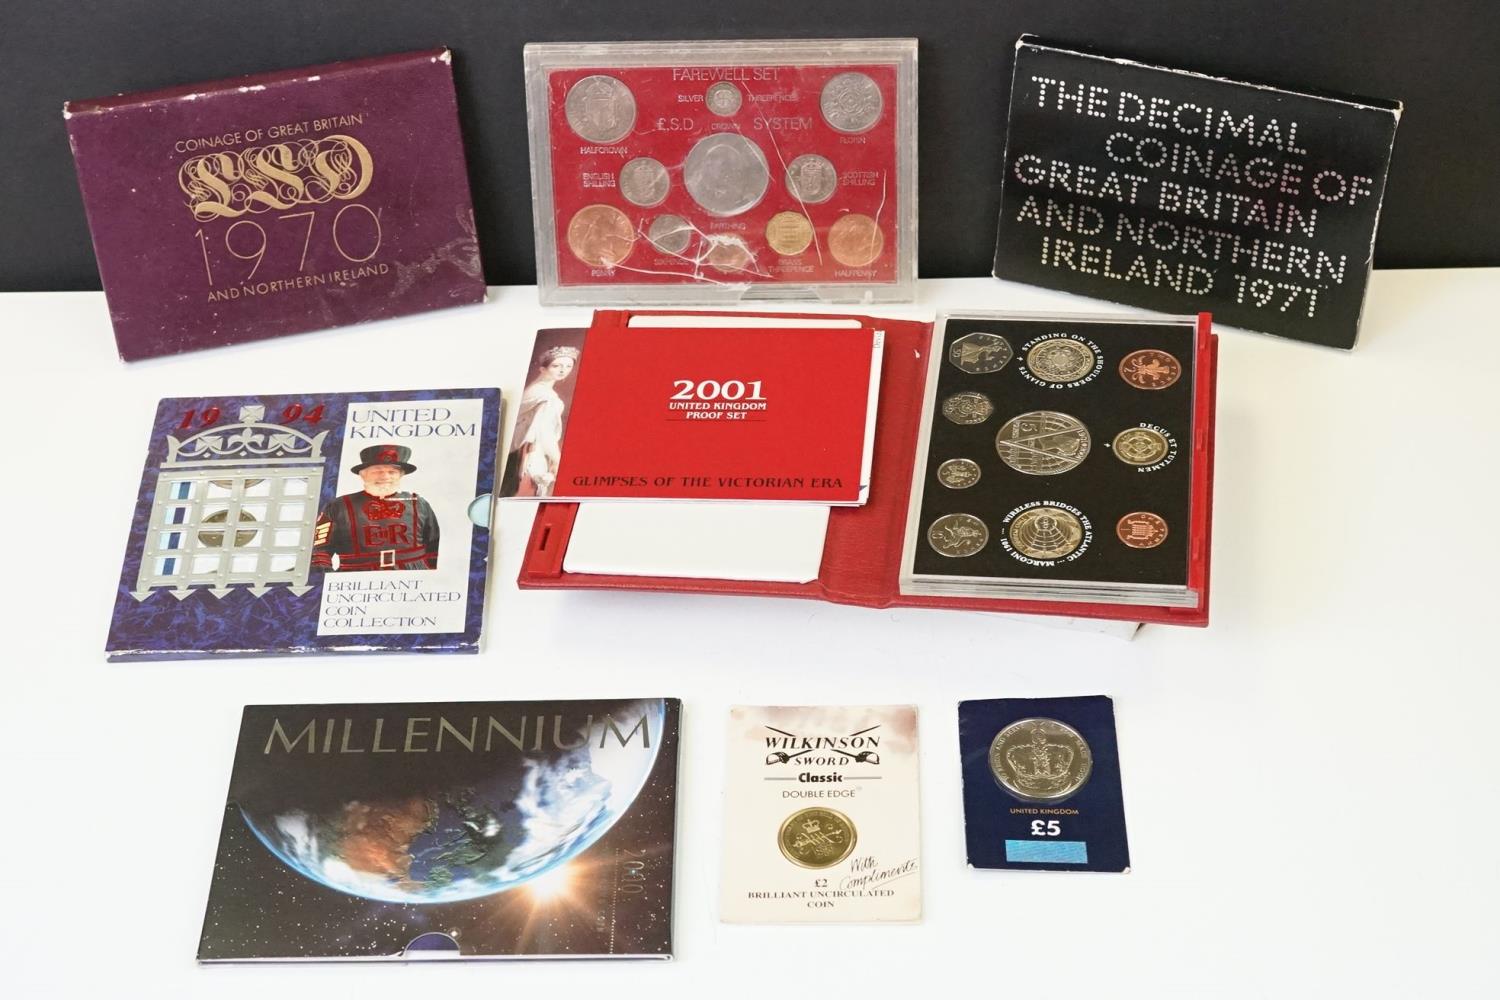 A collection of Royal Mint uncirculated coins to include 1994 year set, 1971 year set, 1970 year